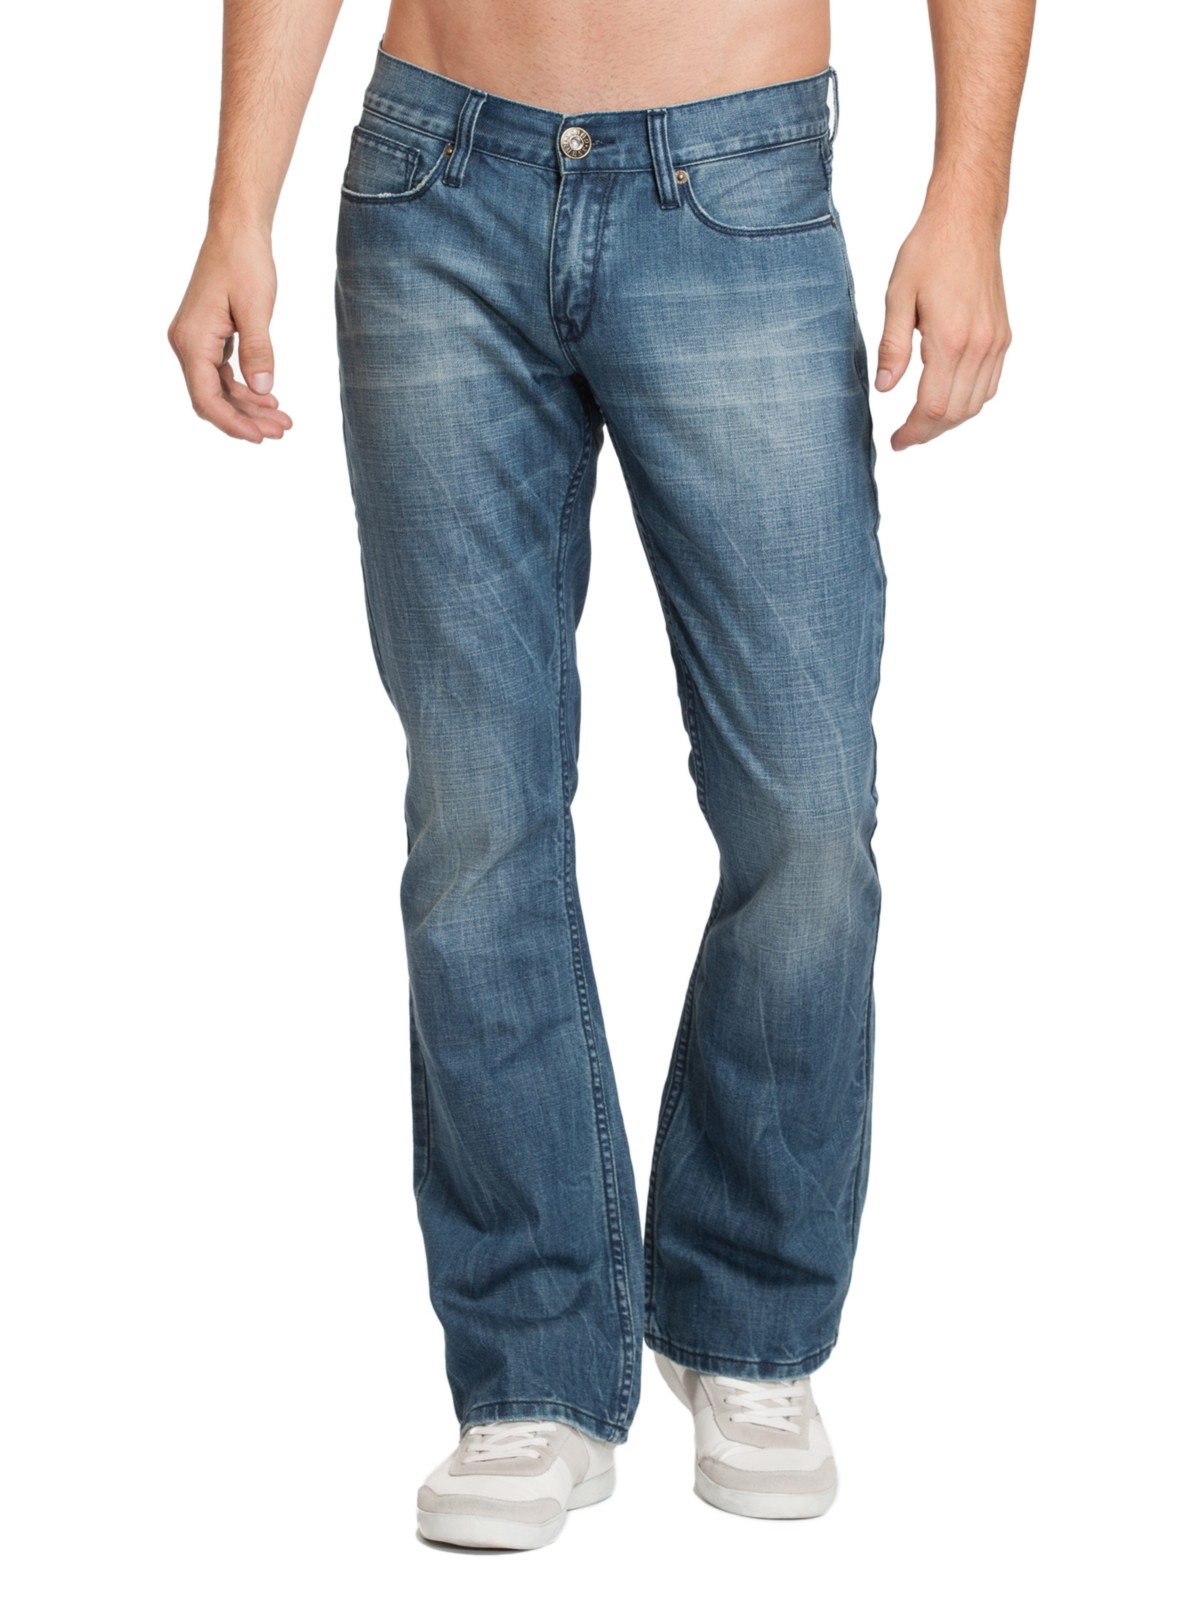 GUESS Marcus Relaxed Bootcut Jeans in Marcus Fit - 33